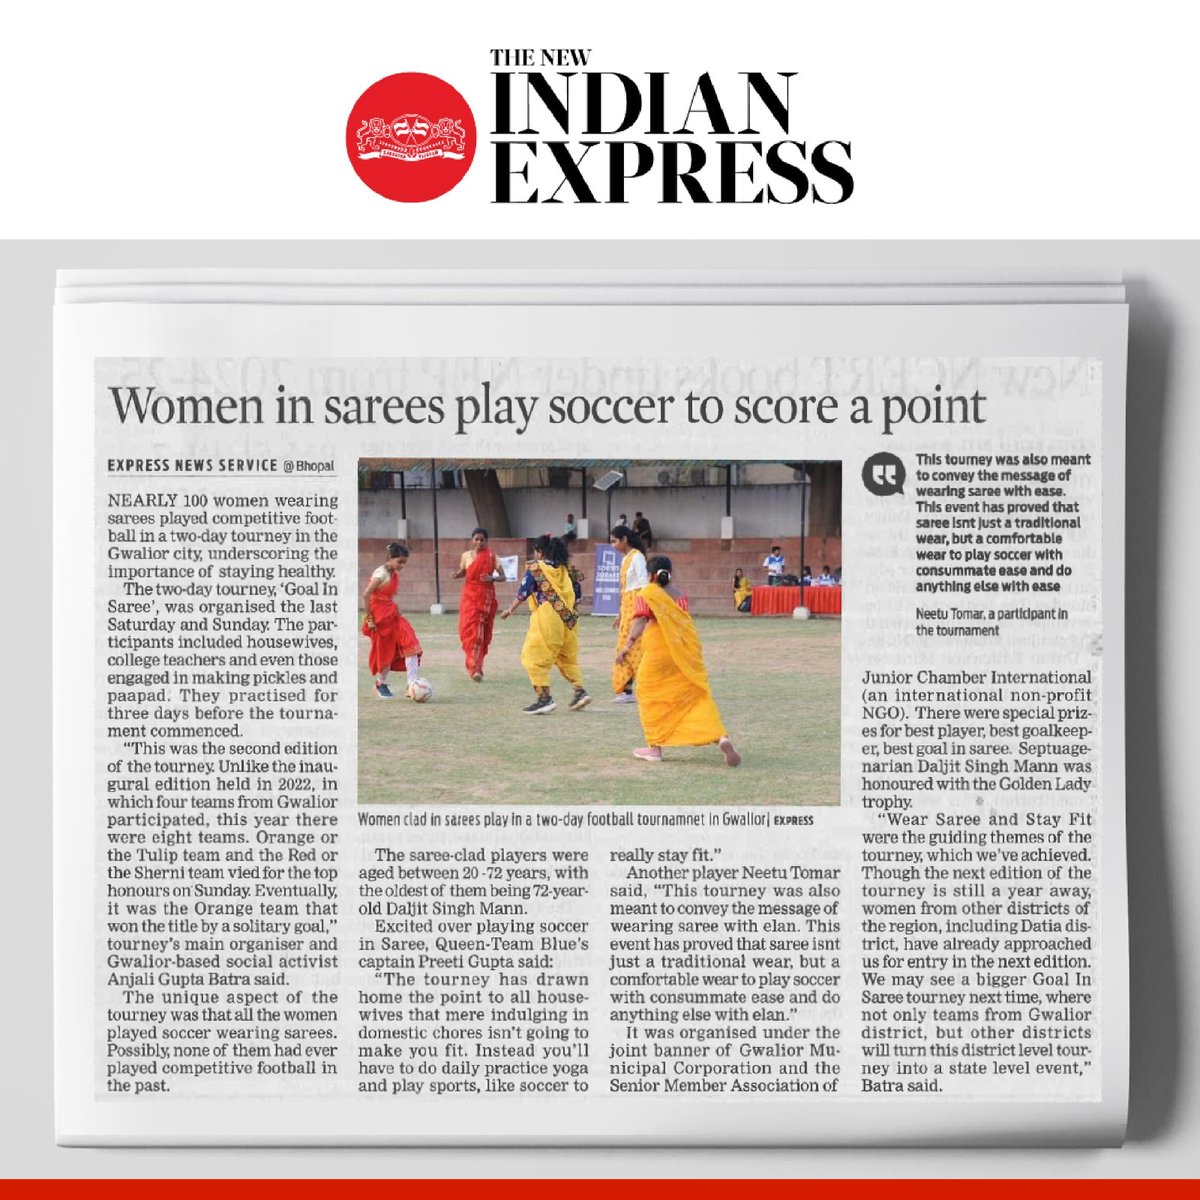 These 100 women in Gwalior prove that sarees and sports can blend perfectly, showcasing how health and fashion can go hand in hand at a football tournament.
#WomenInSarees  #WomenInSareesSoccer #WomensFootball #TNIIE #IndiaExpress #WomenInFootball #ShePlays #WomenUnited…